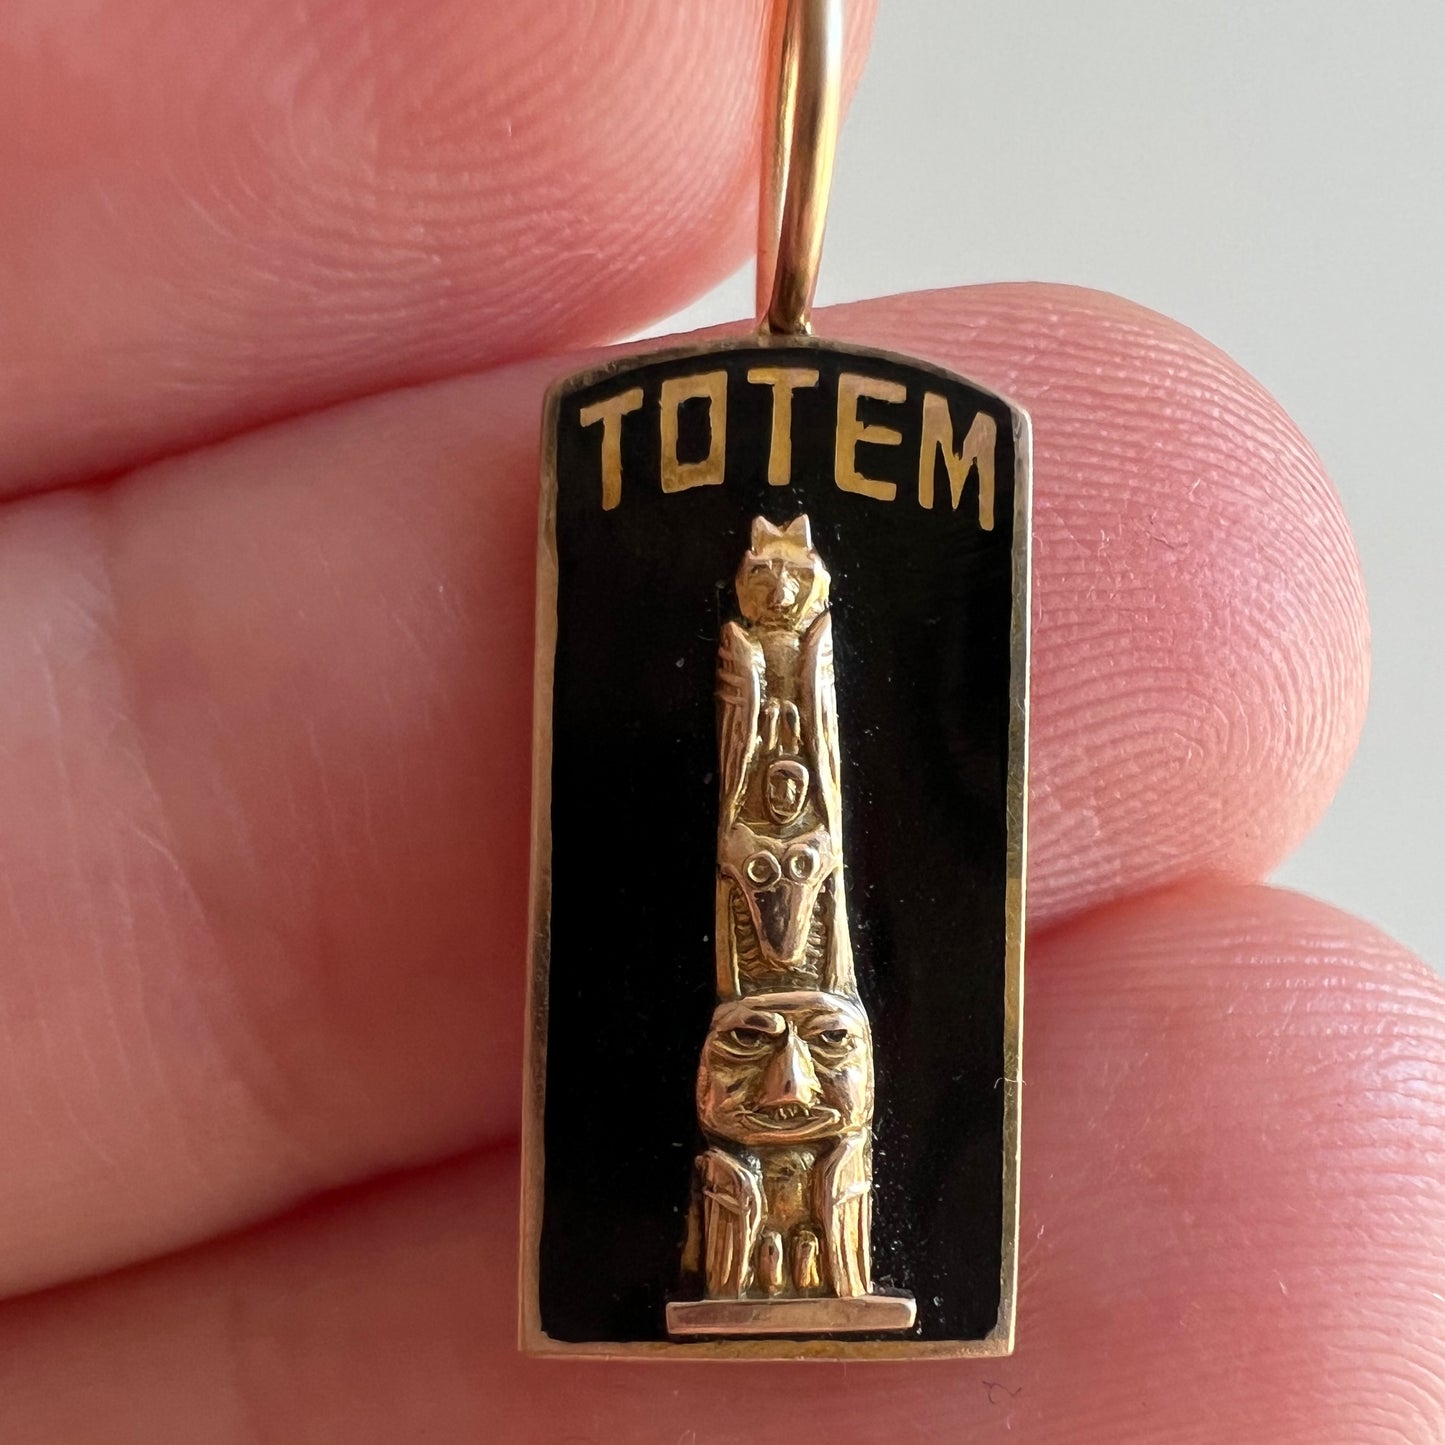 reimagined V I N T A G E // tiniest totem / 10k yellow gold and enamel TOTEM sorority pin conversion / a pendant